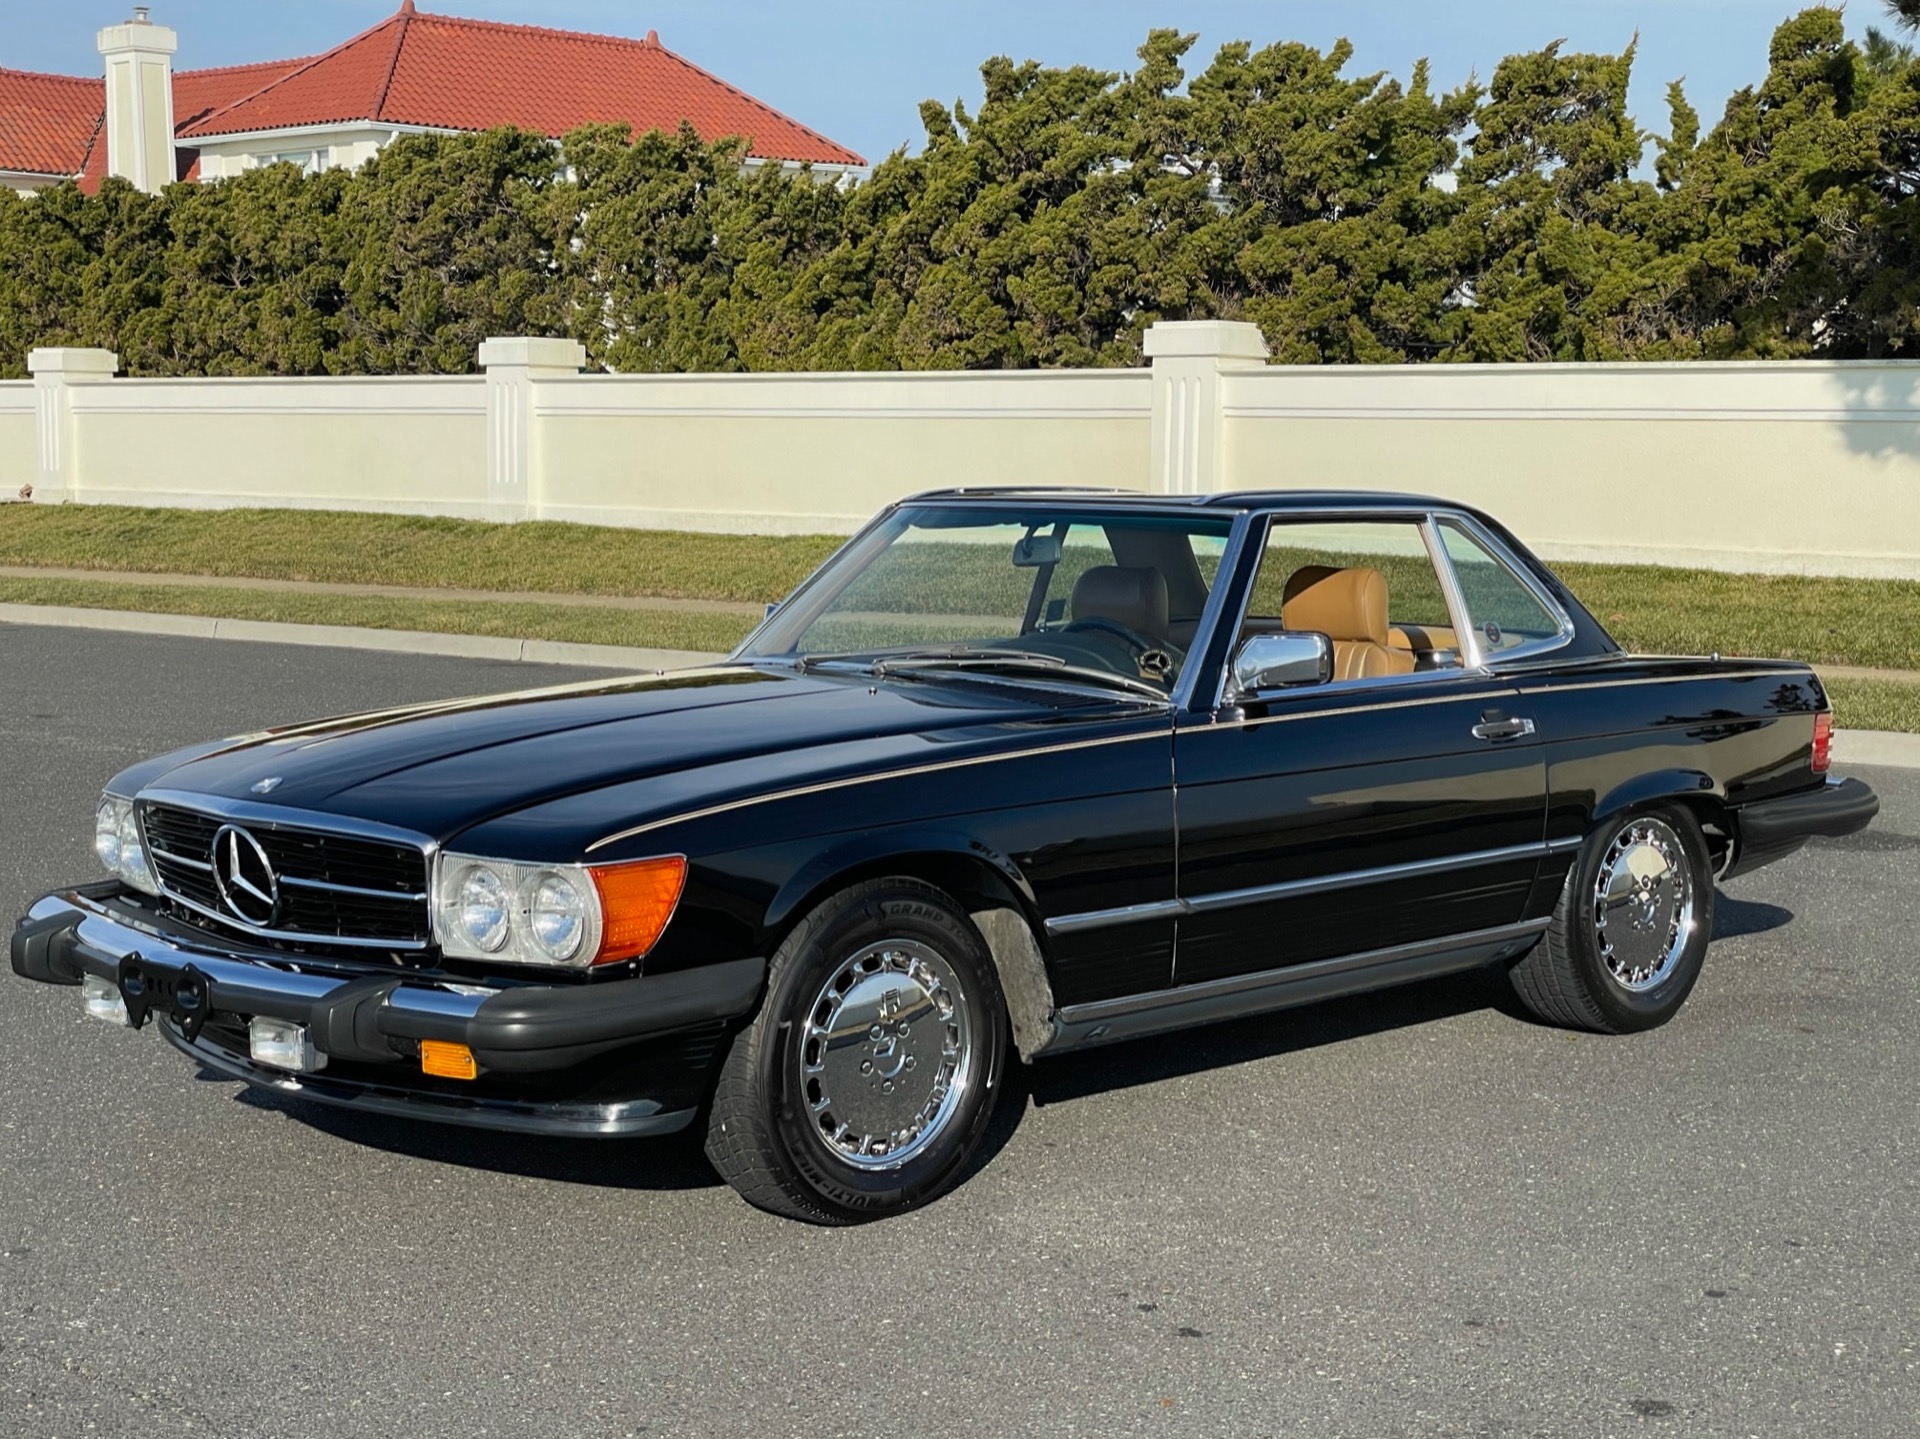 Used 1989 Mercedes-Benz 560SL 560 SL For Sale ($15,900) | Legend Leasing Stock #100254